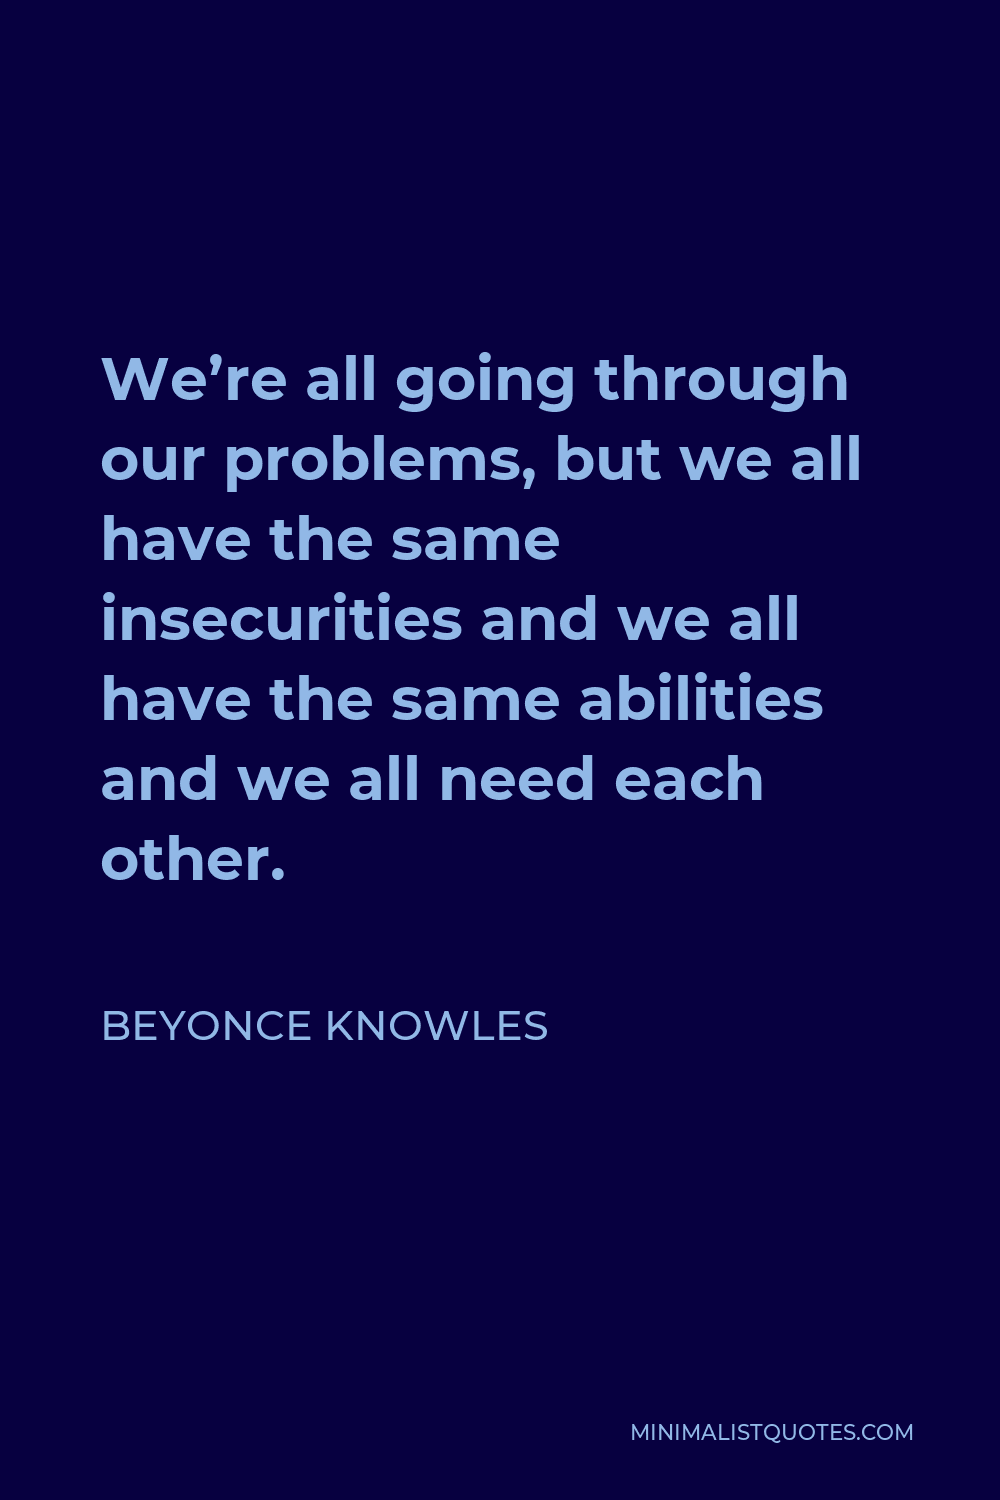 Beyonce Knowles Quote - We’re all going through our problems, but we all have the same insecurities and we all have the same abilities and we all need each other.